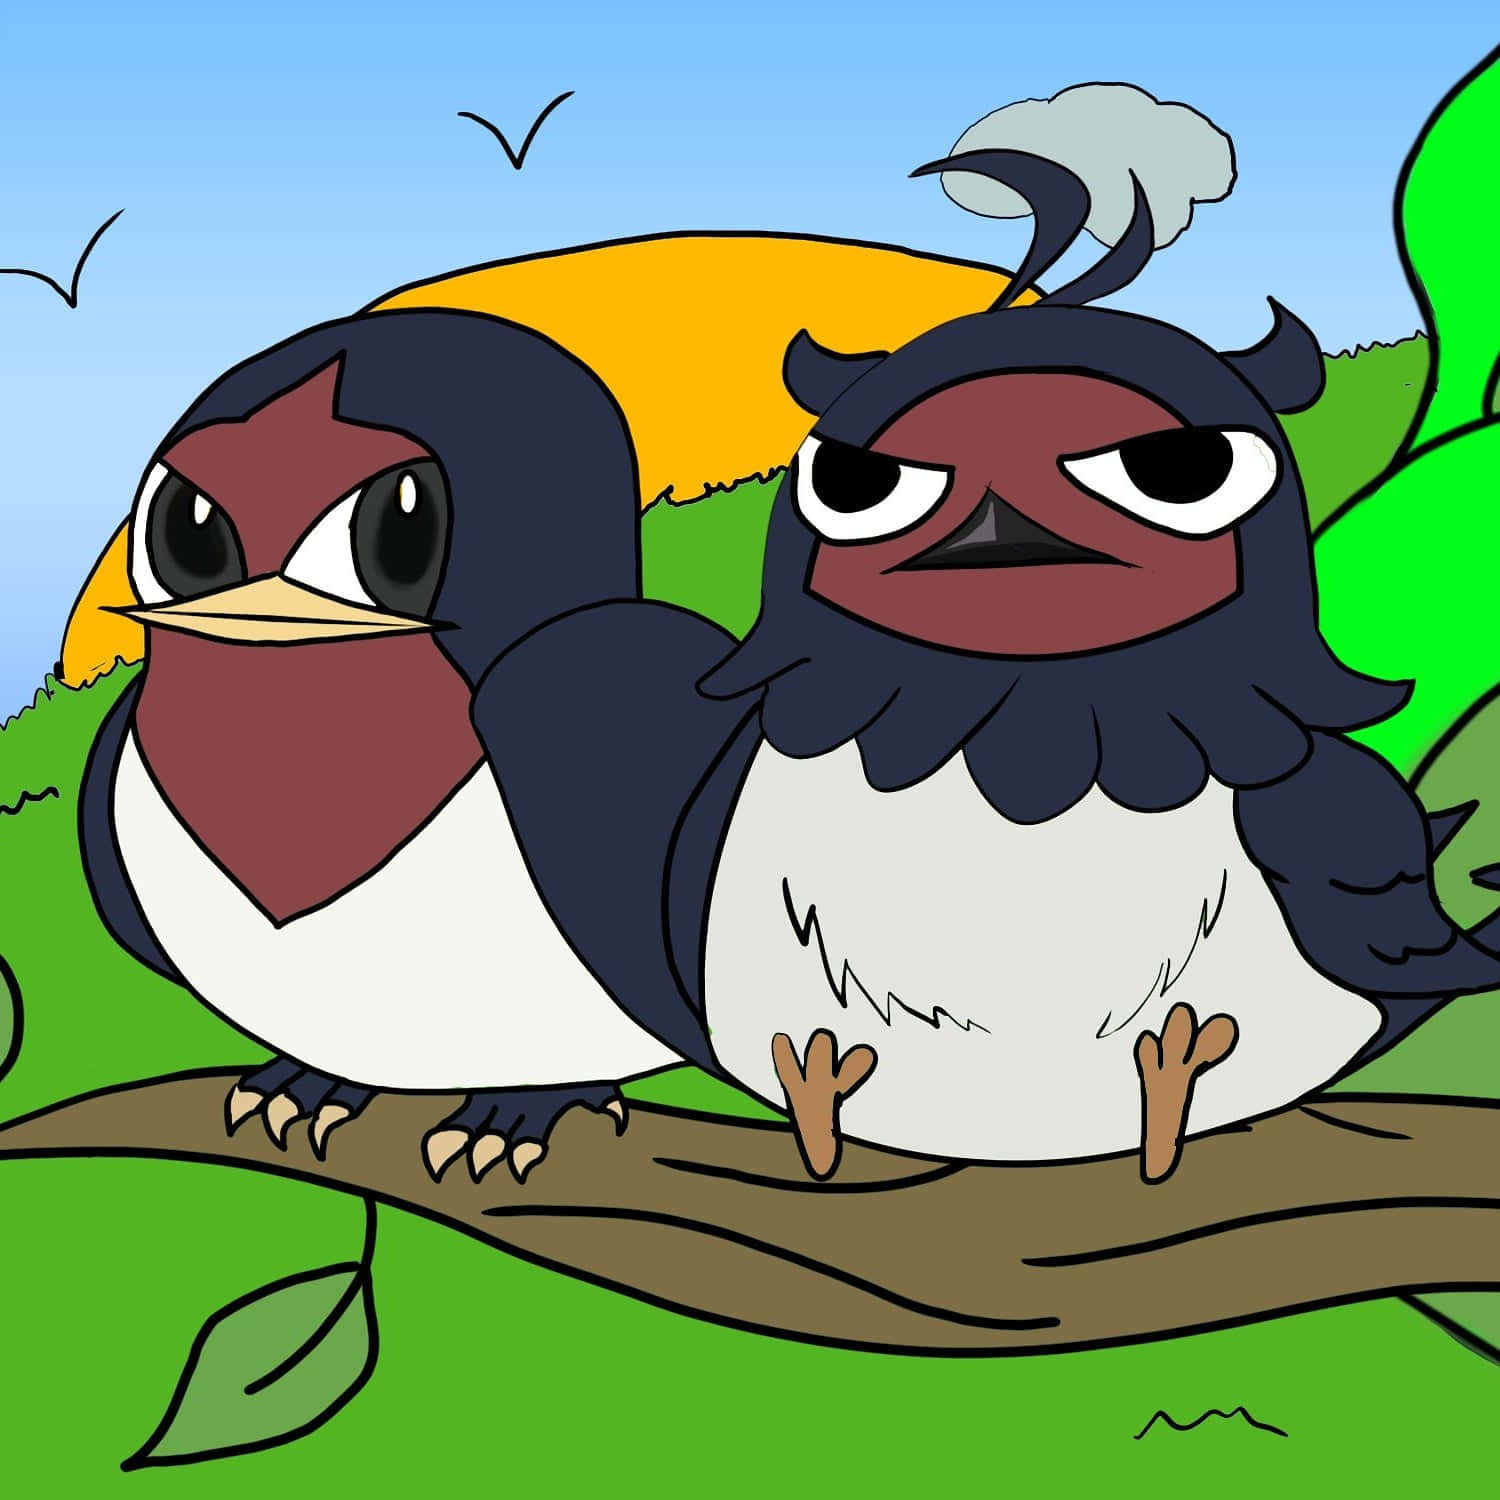 Nero and Taillow Enjoying a Peaceful Moment on a Tree Branch Wallpaper